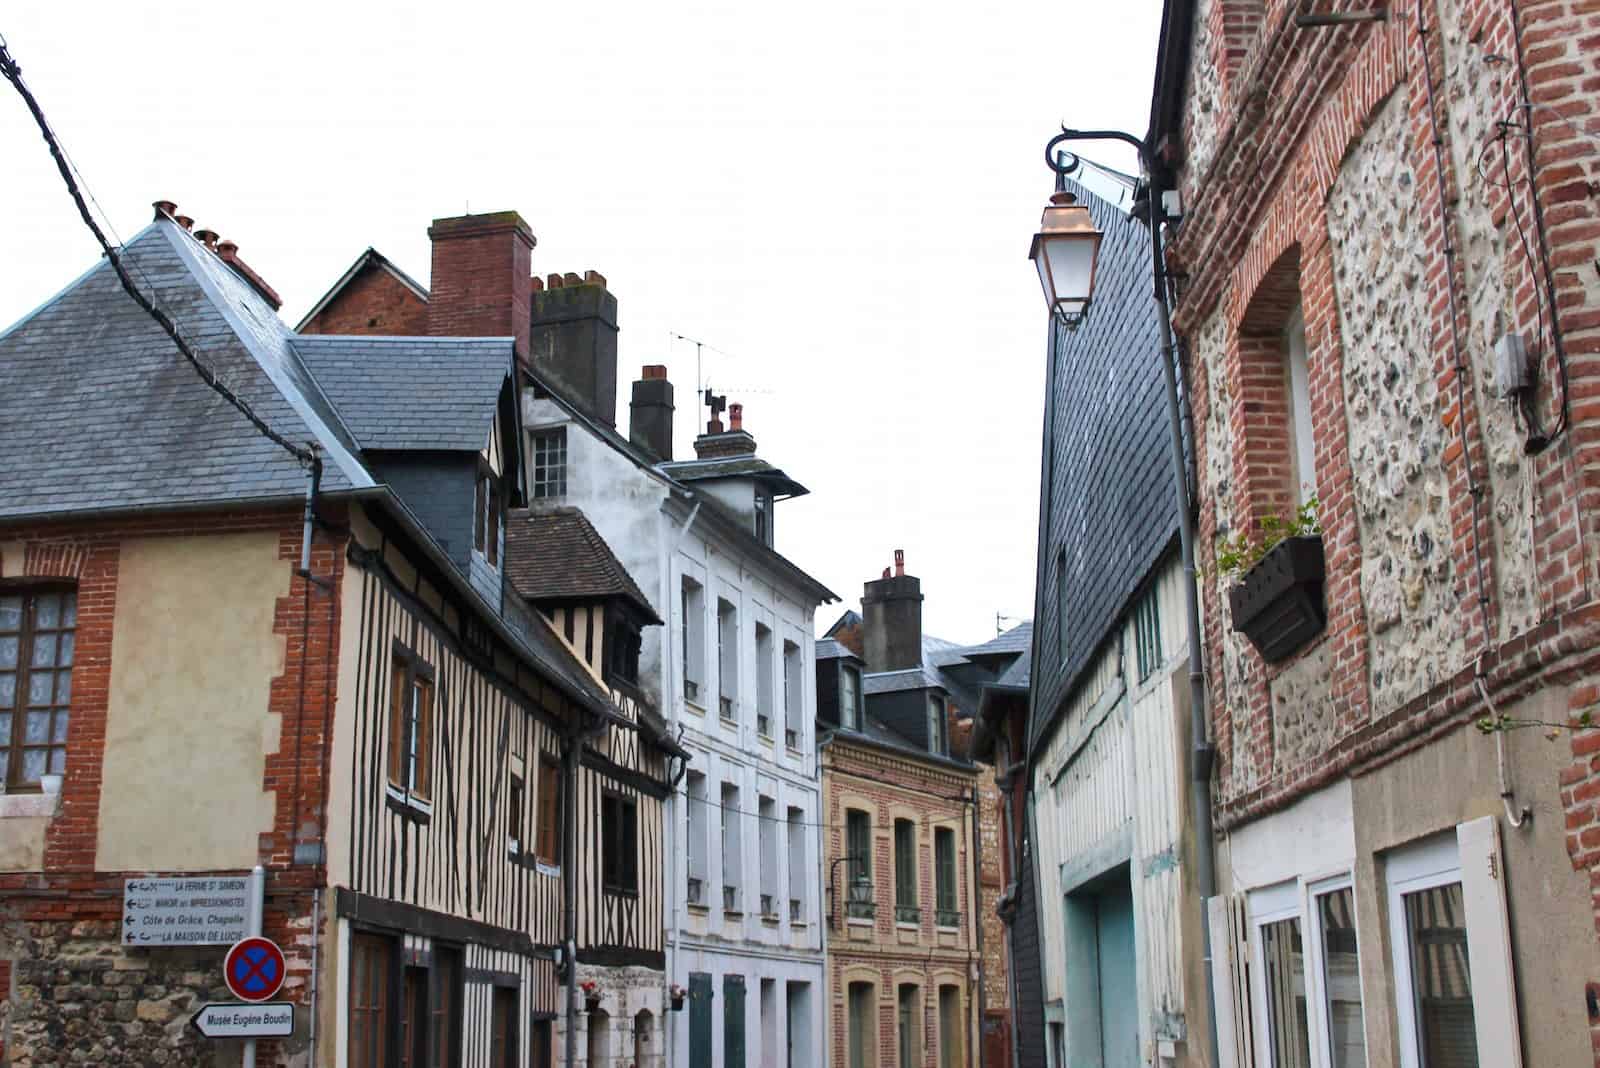 Honfleur, a quaint town in the Normand region of France, is the perfect weekend retreat from Paris.